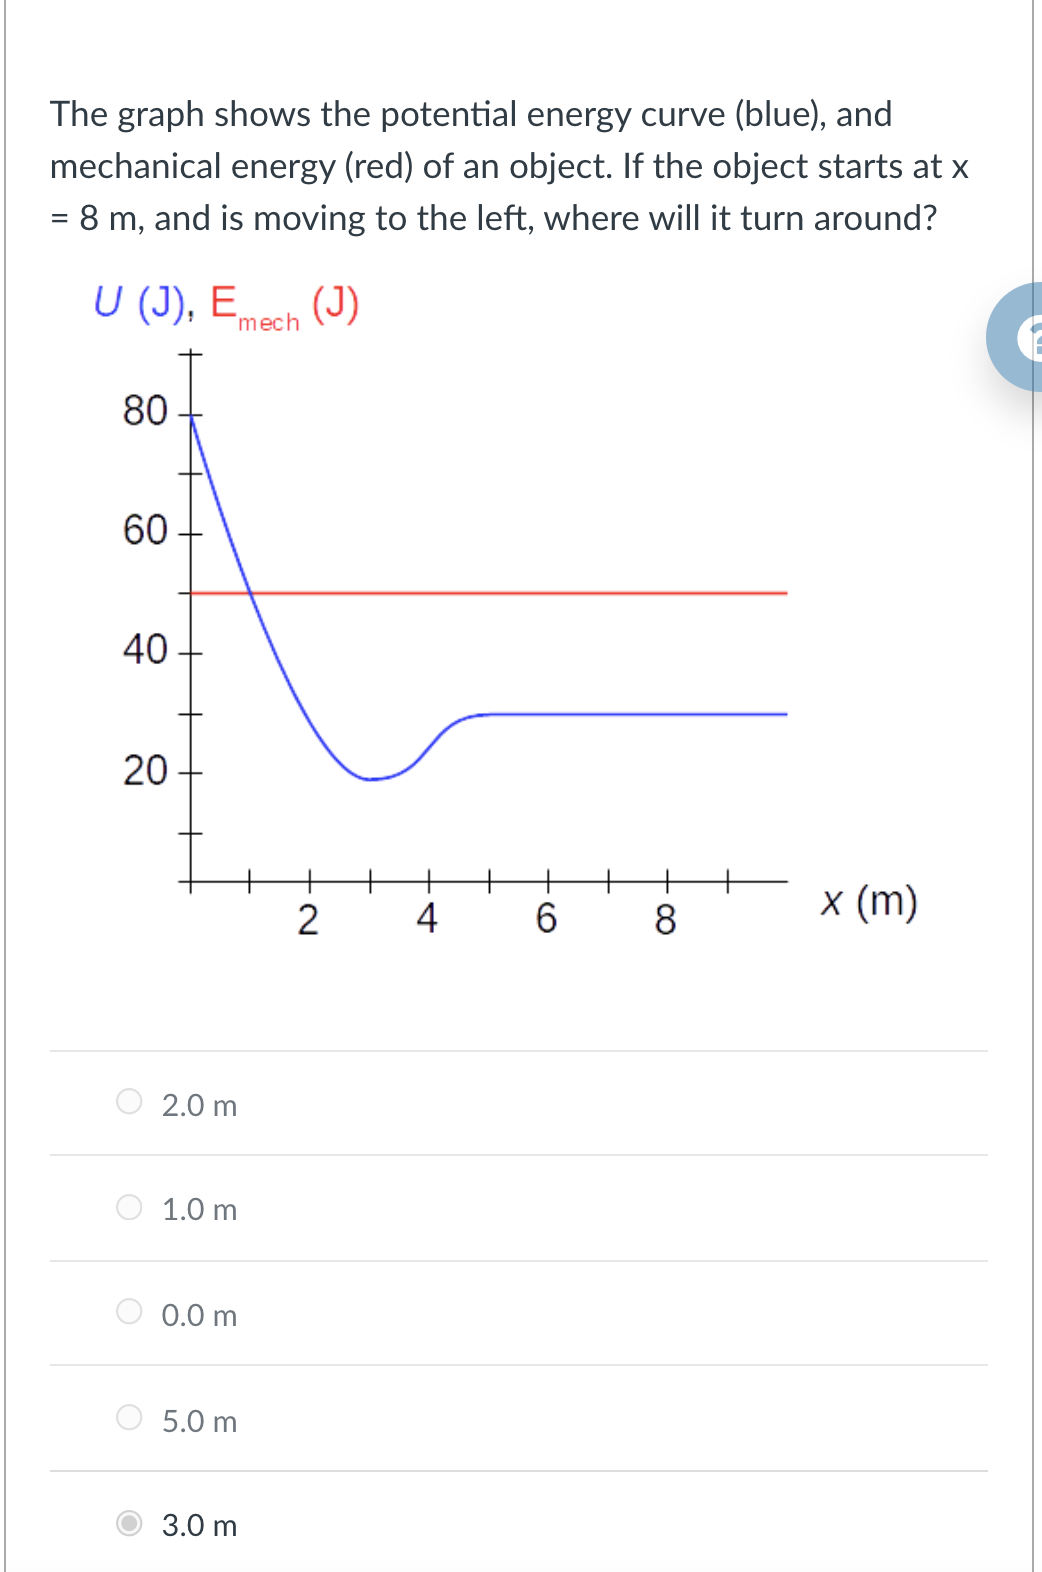 The graph shows the potential energy curve (blue), and
mechanical energy (red) of an object. If the object starts at x
= 8 m, and is moving to the left, where will it turn around?
U (J), E,
mech (J)
80
60
40
20
4
6.
8.
x (m)
2.0 m
1.0 m
0.0 m
5.0 m
3.0 m
2.
